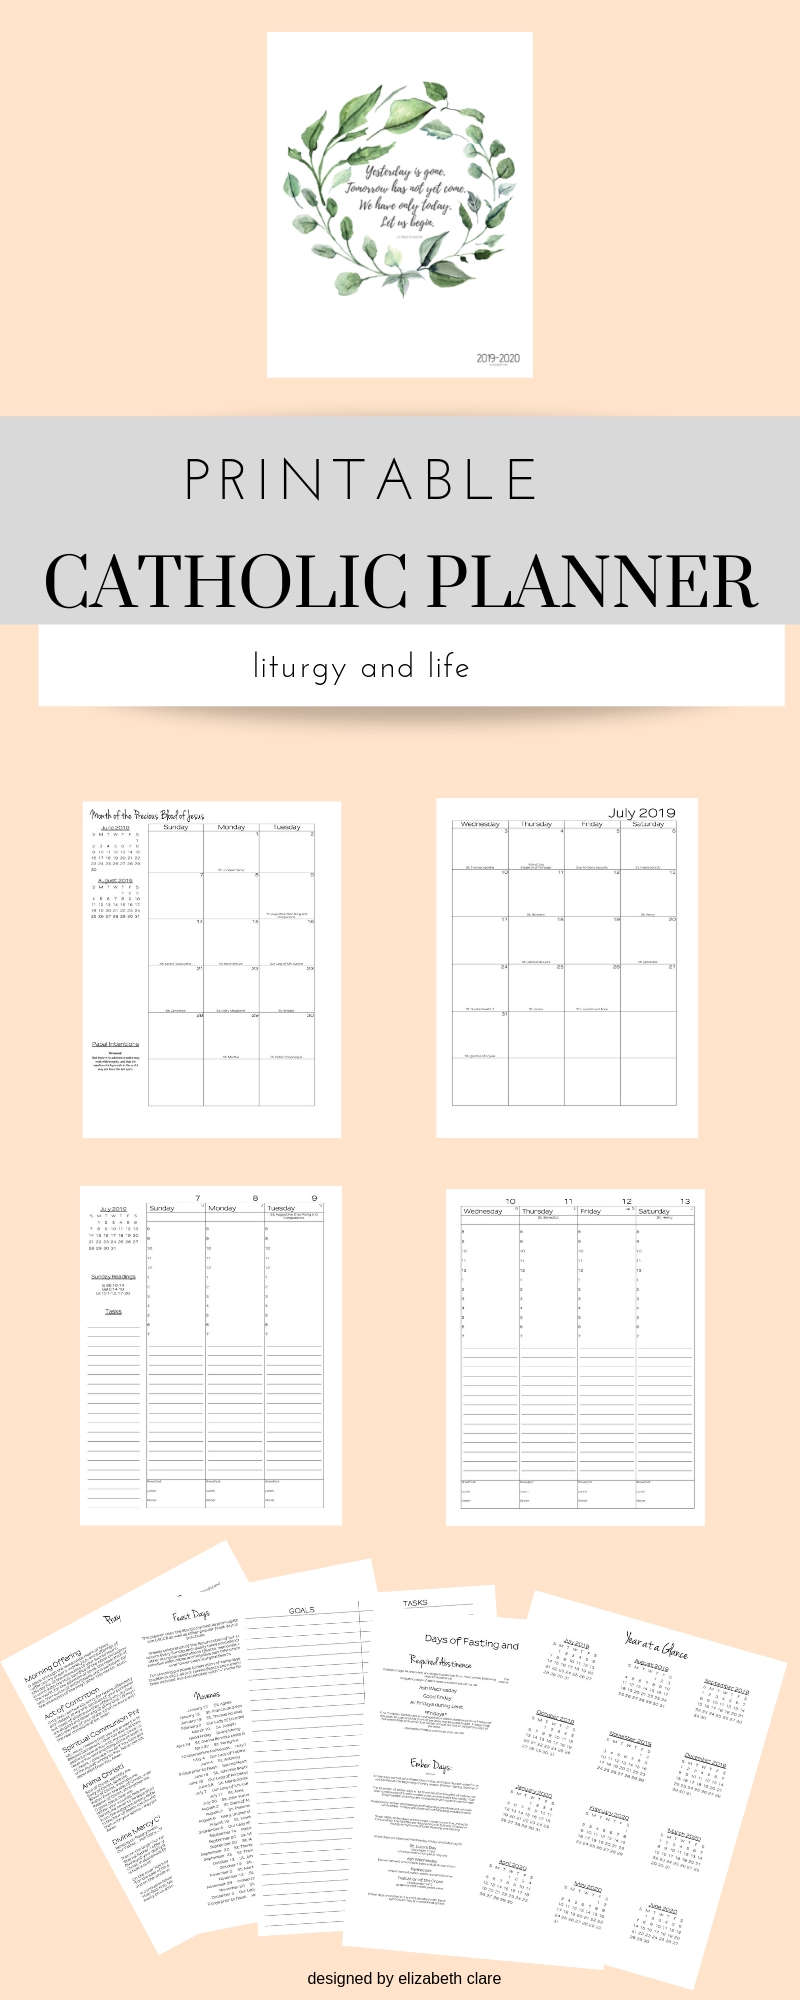 2019 - 2020 Catholic Planner Weekly Printable: Daily Planner intended for Catholic Liturgical Calendar 2020 Printable